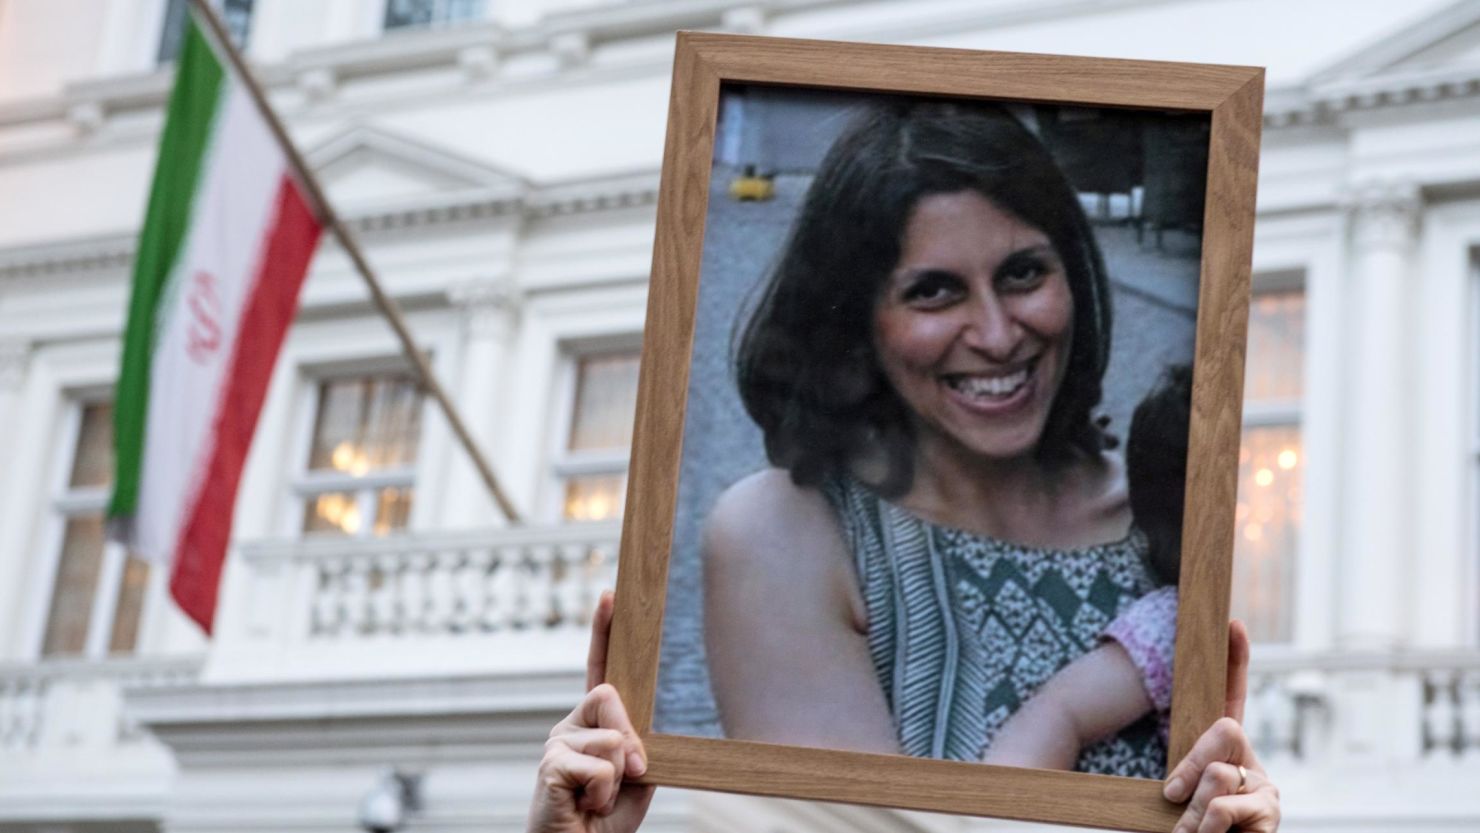 Supporters of Nazanin Zaghari-Ratcliffe hold a photo of the jailed woman during a vigil outisde the Iranian Embassy in London in January 2017.